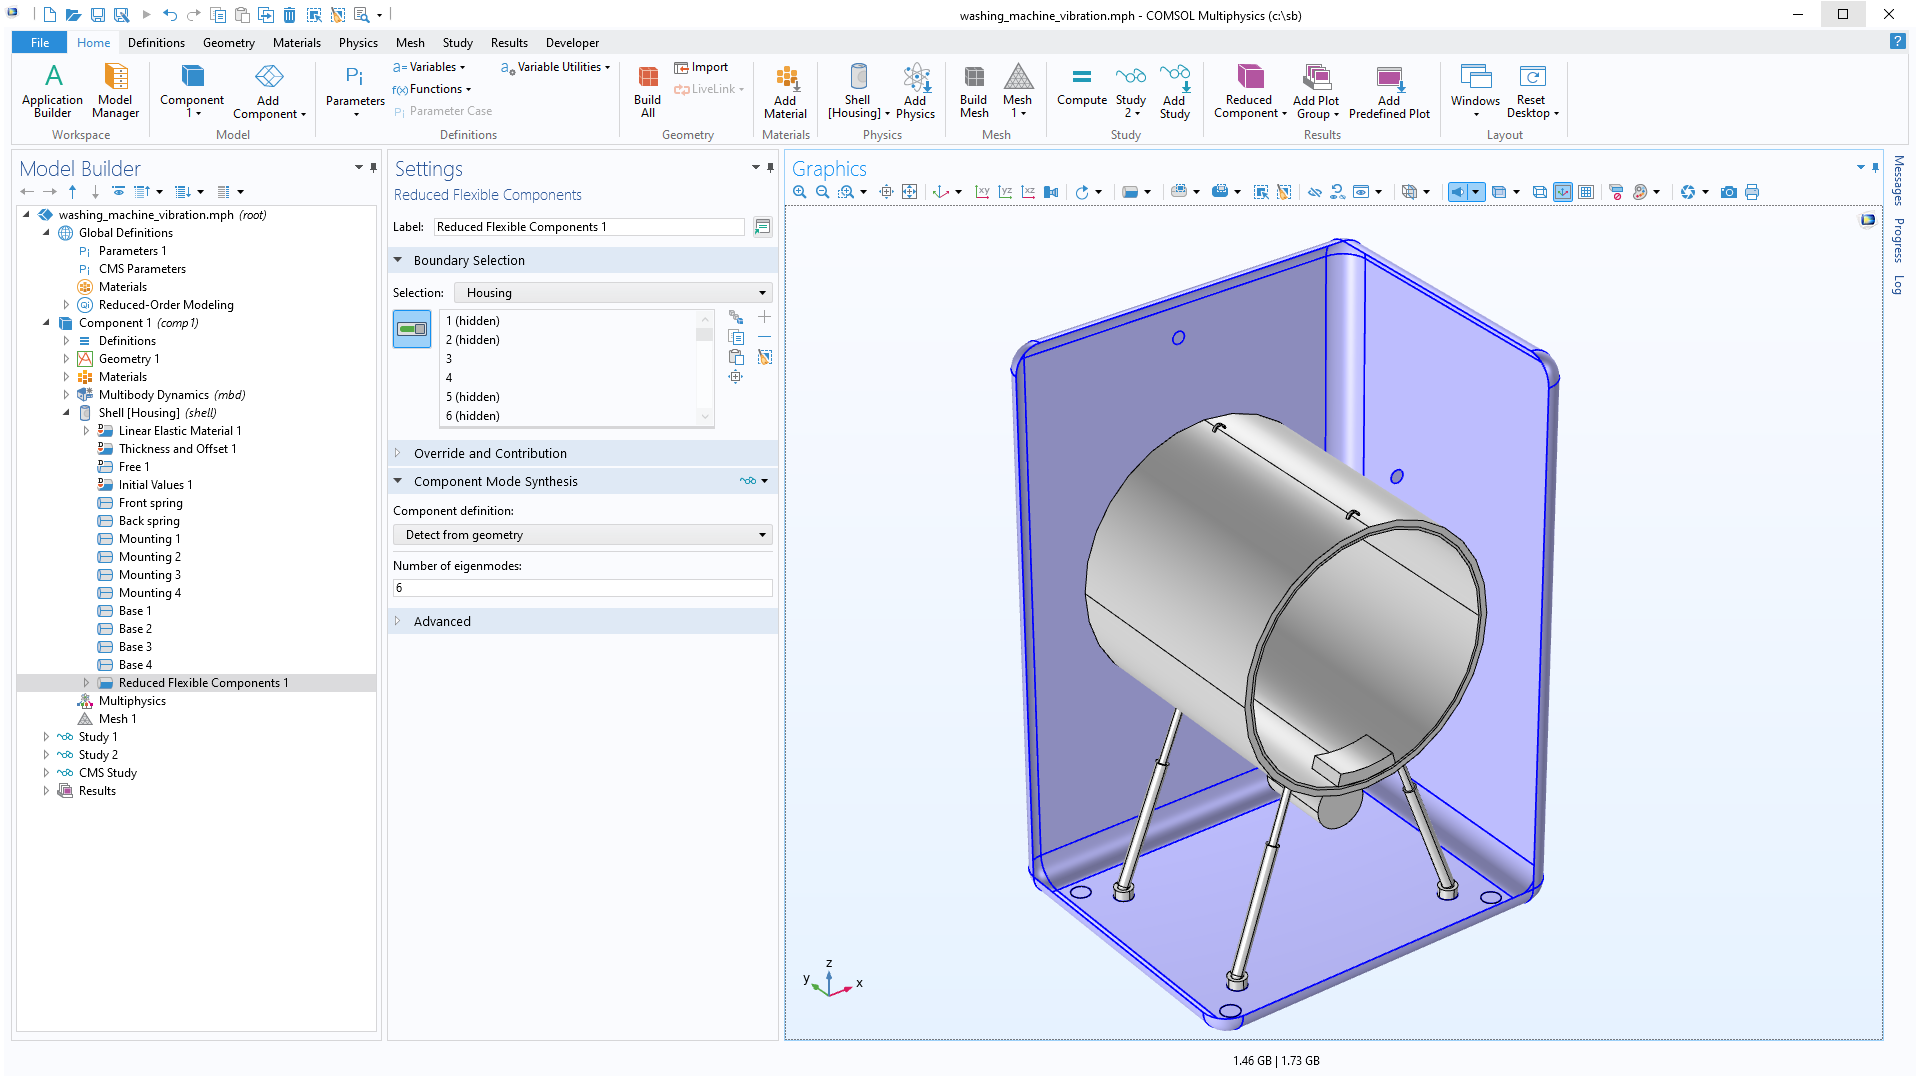 The COMSOL Multiphysics UI showing the Model Builder with the Reduced Flexible Components node highlighted, the corresponding Settings window, and a washing machine model in the Graphics window.